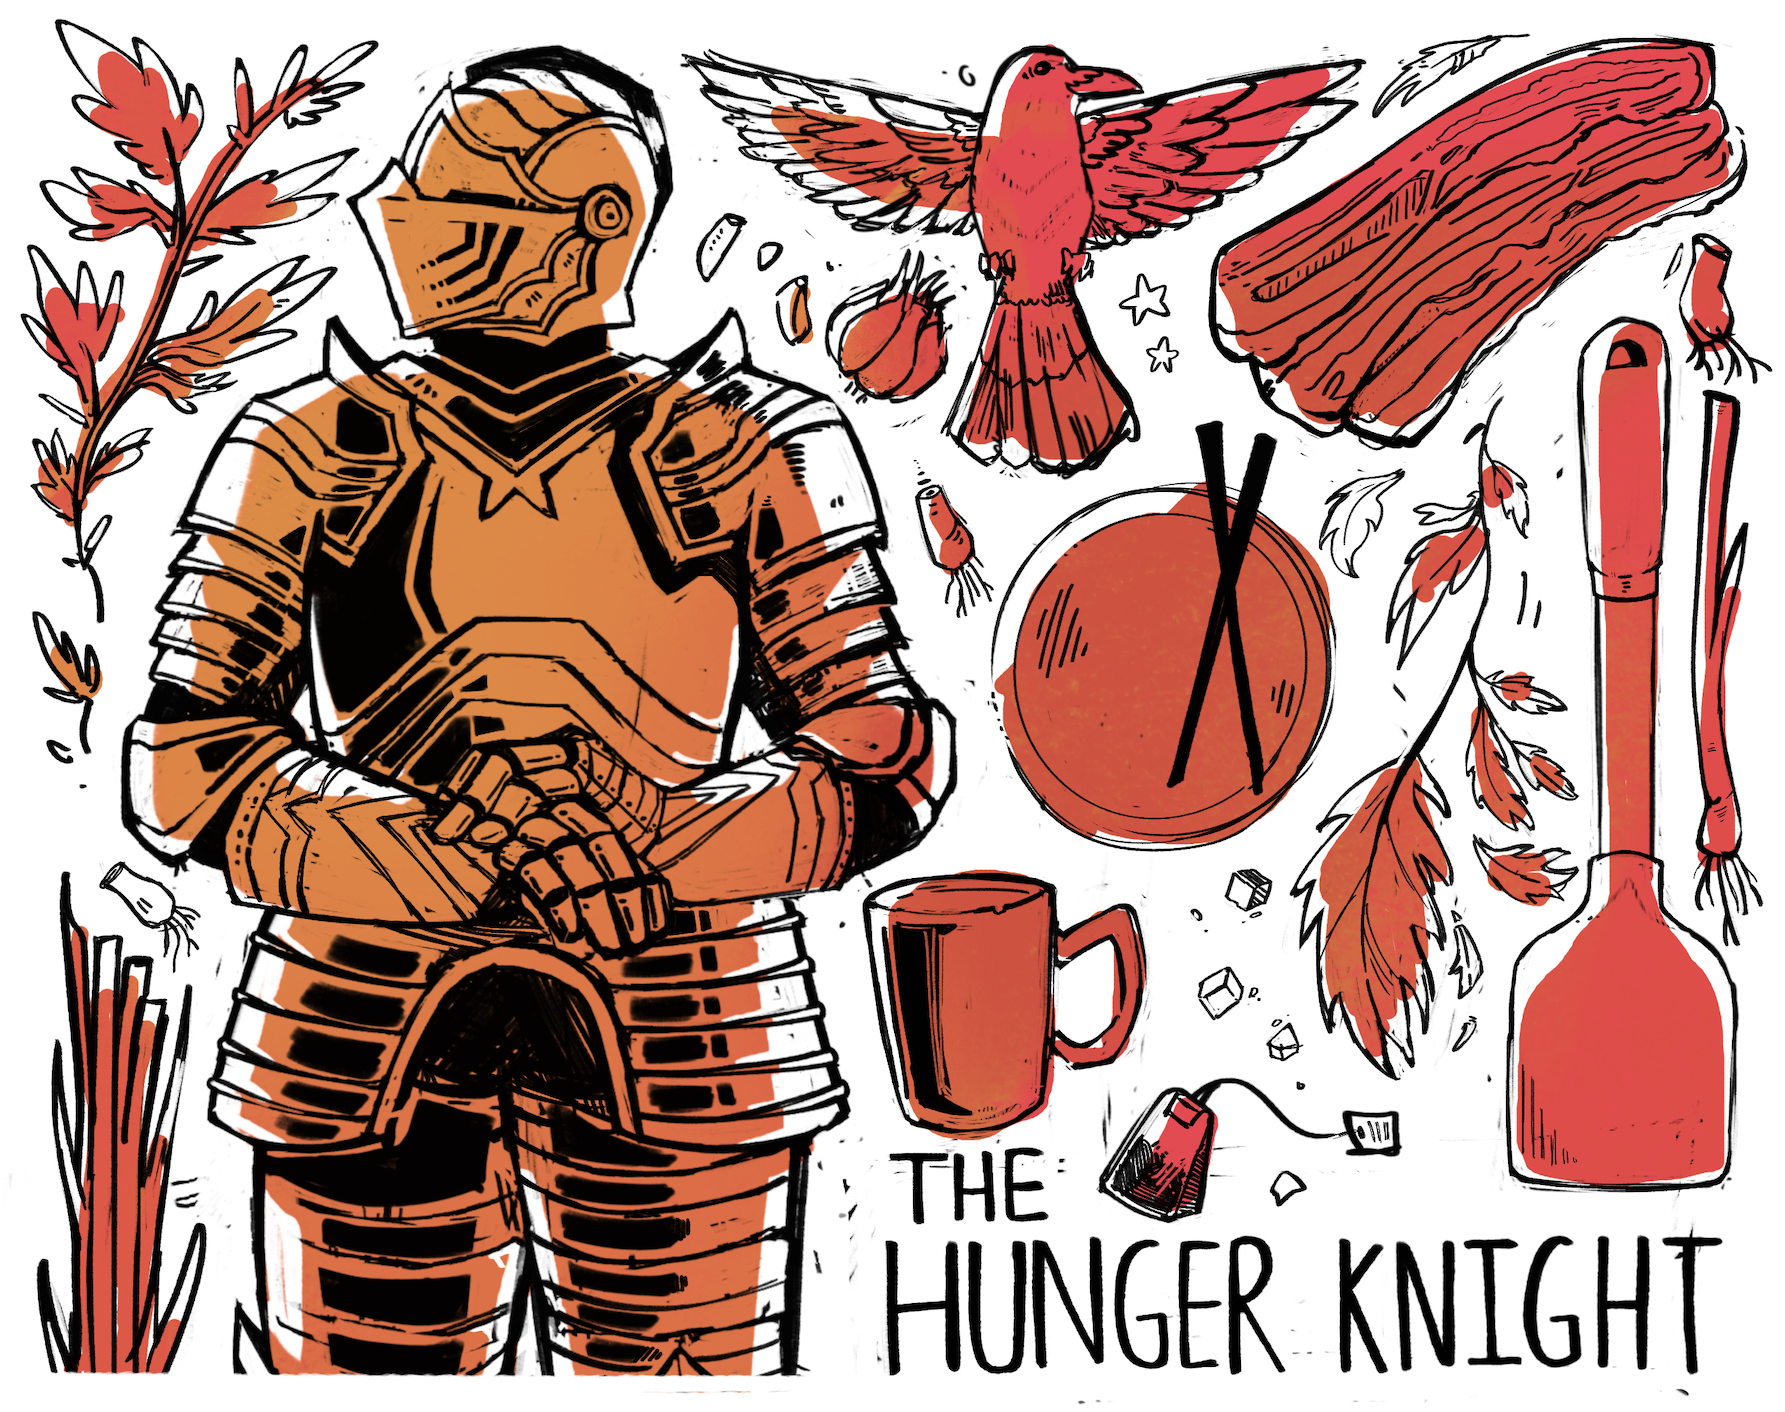 The Hunger Knight